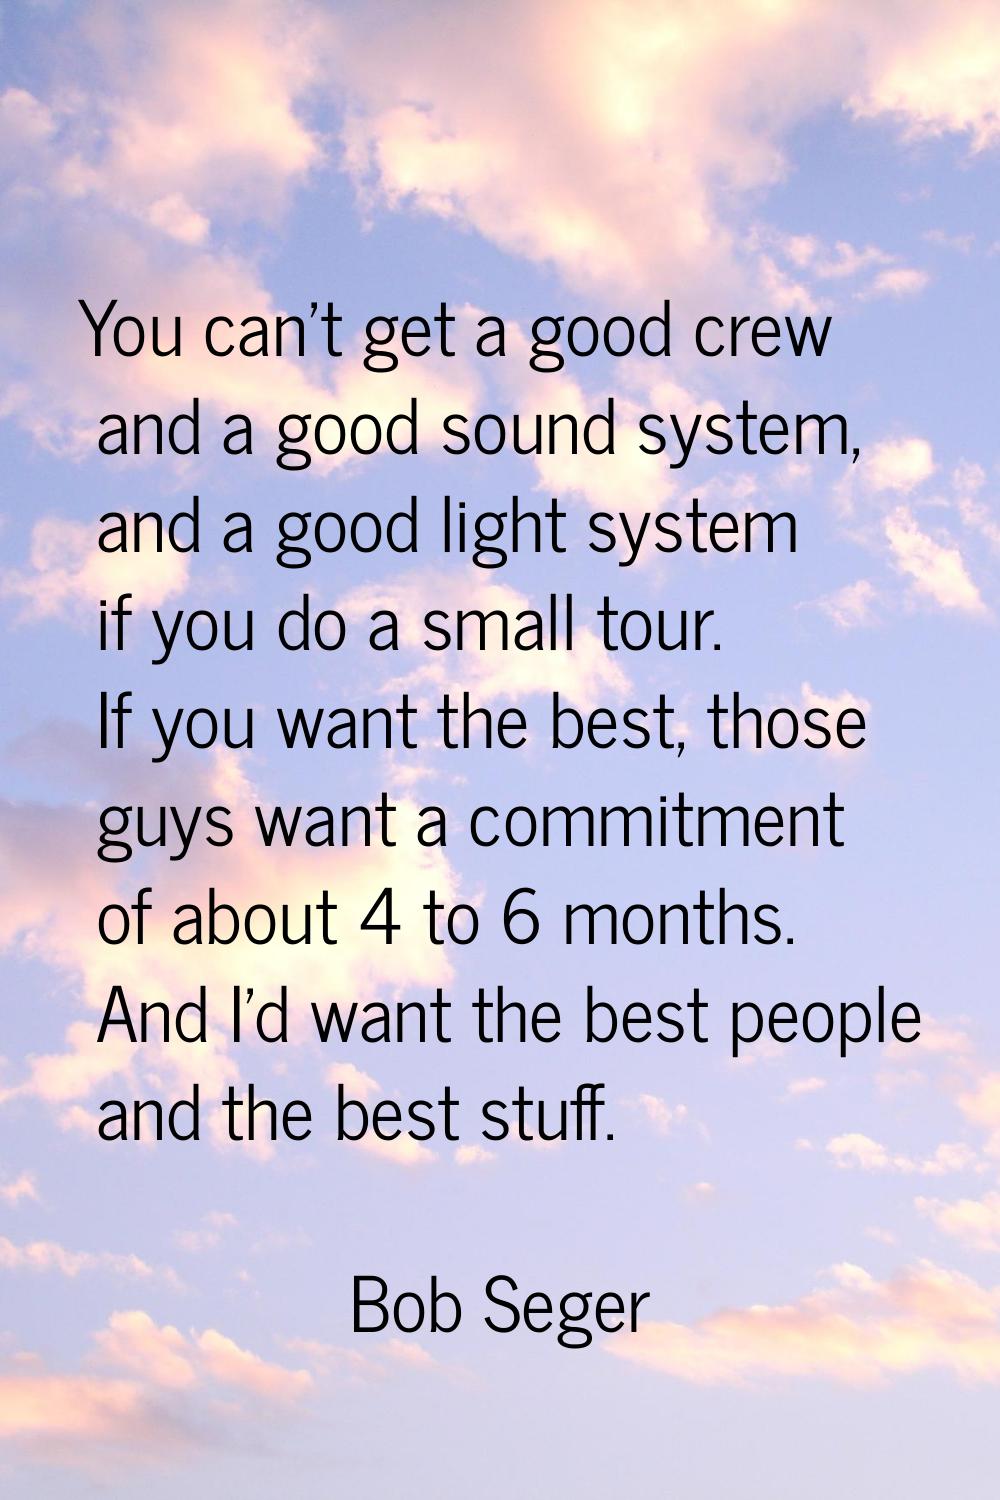 You can't get a good crew and a good sound system, and a good light system if you do a small tour. 